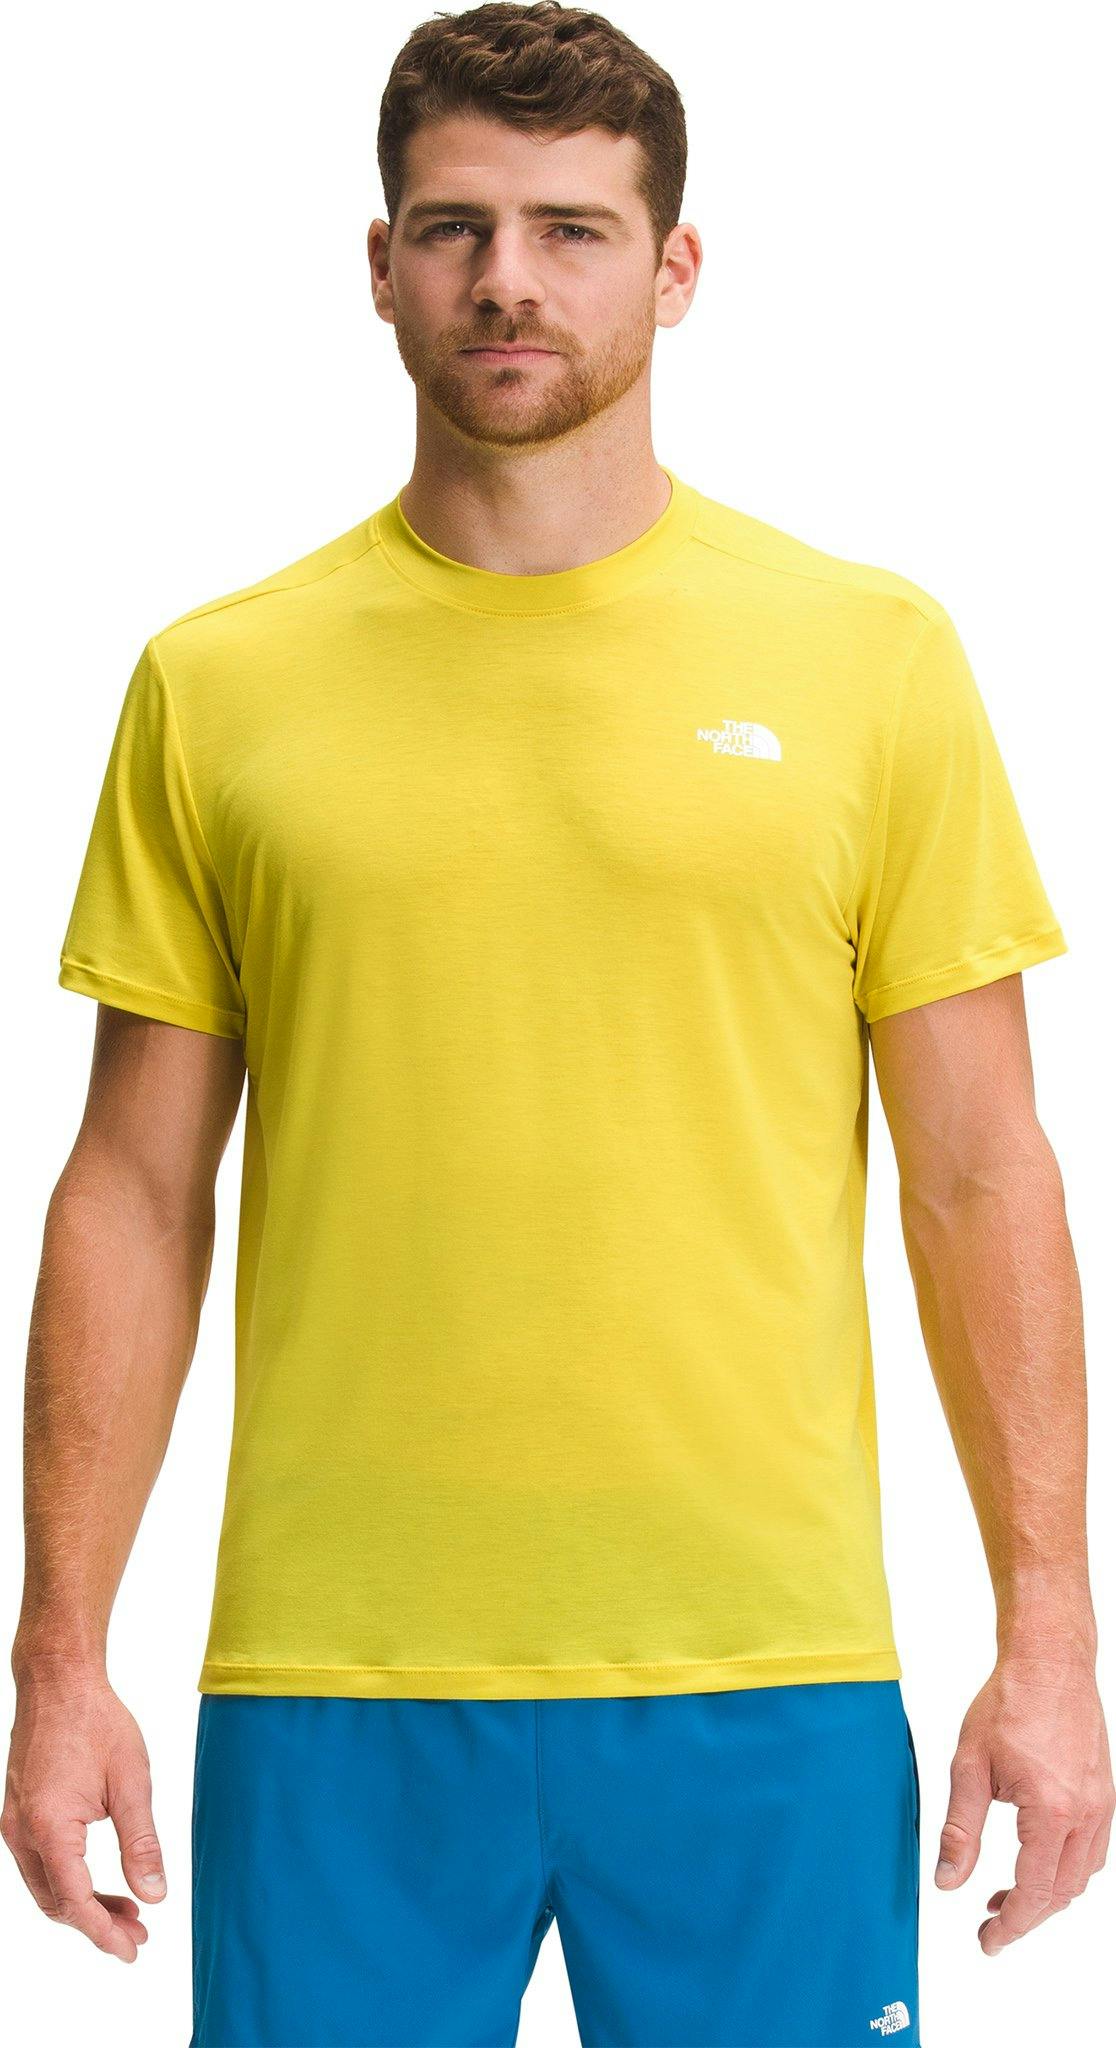 Product image for Wander Short Sleeve Tee - Men's